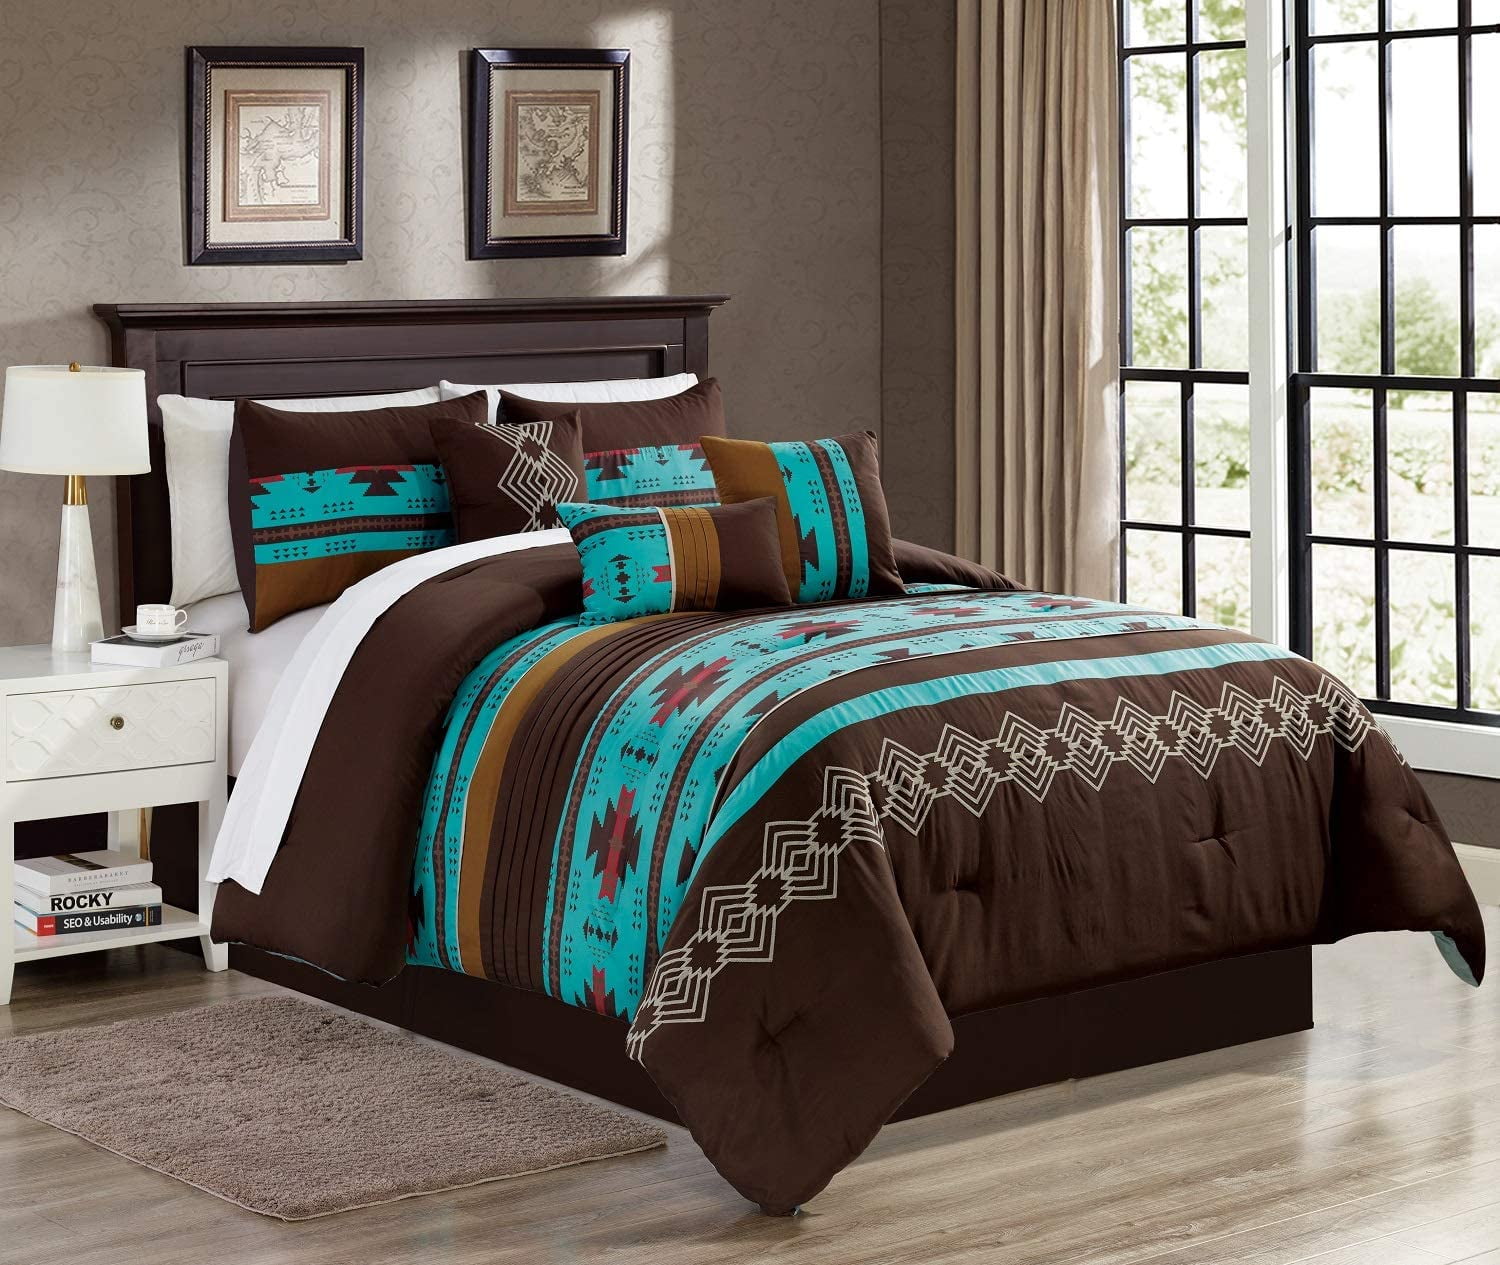 Details about   BEAUTIFUL 7 PC ELEGANT CHIC BLACK SILVER GREY WHITE SOFT TEXTURED COMFORTER SET 